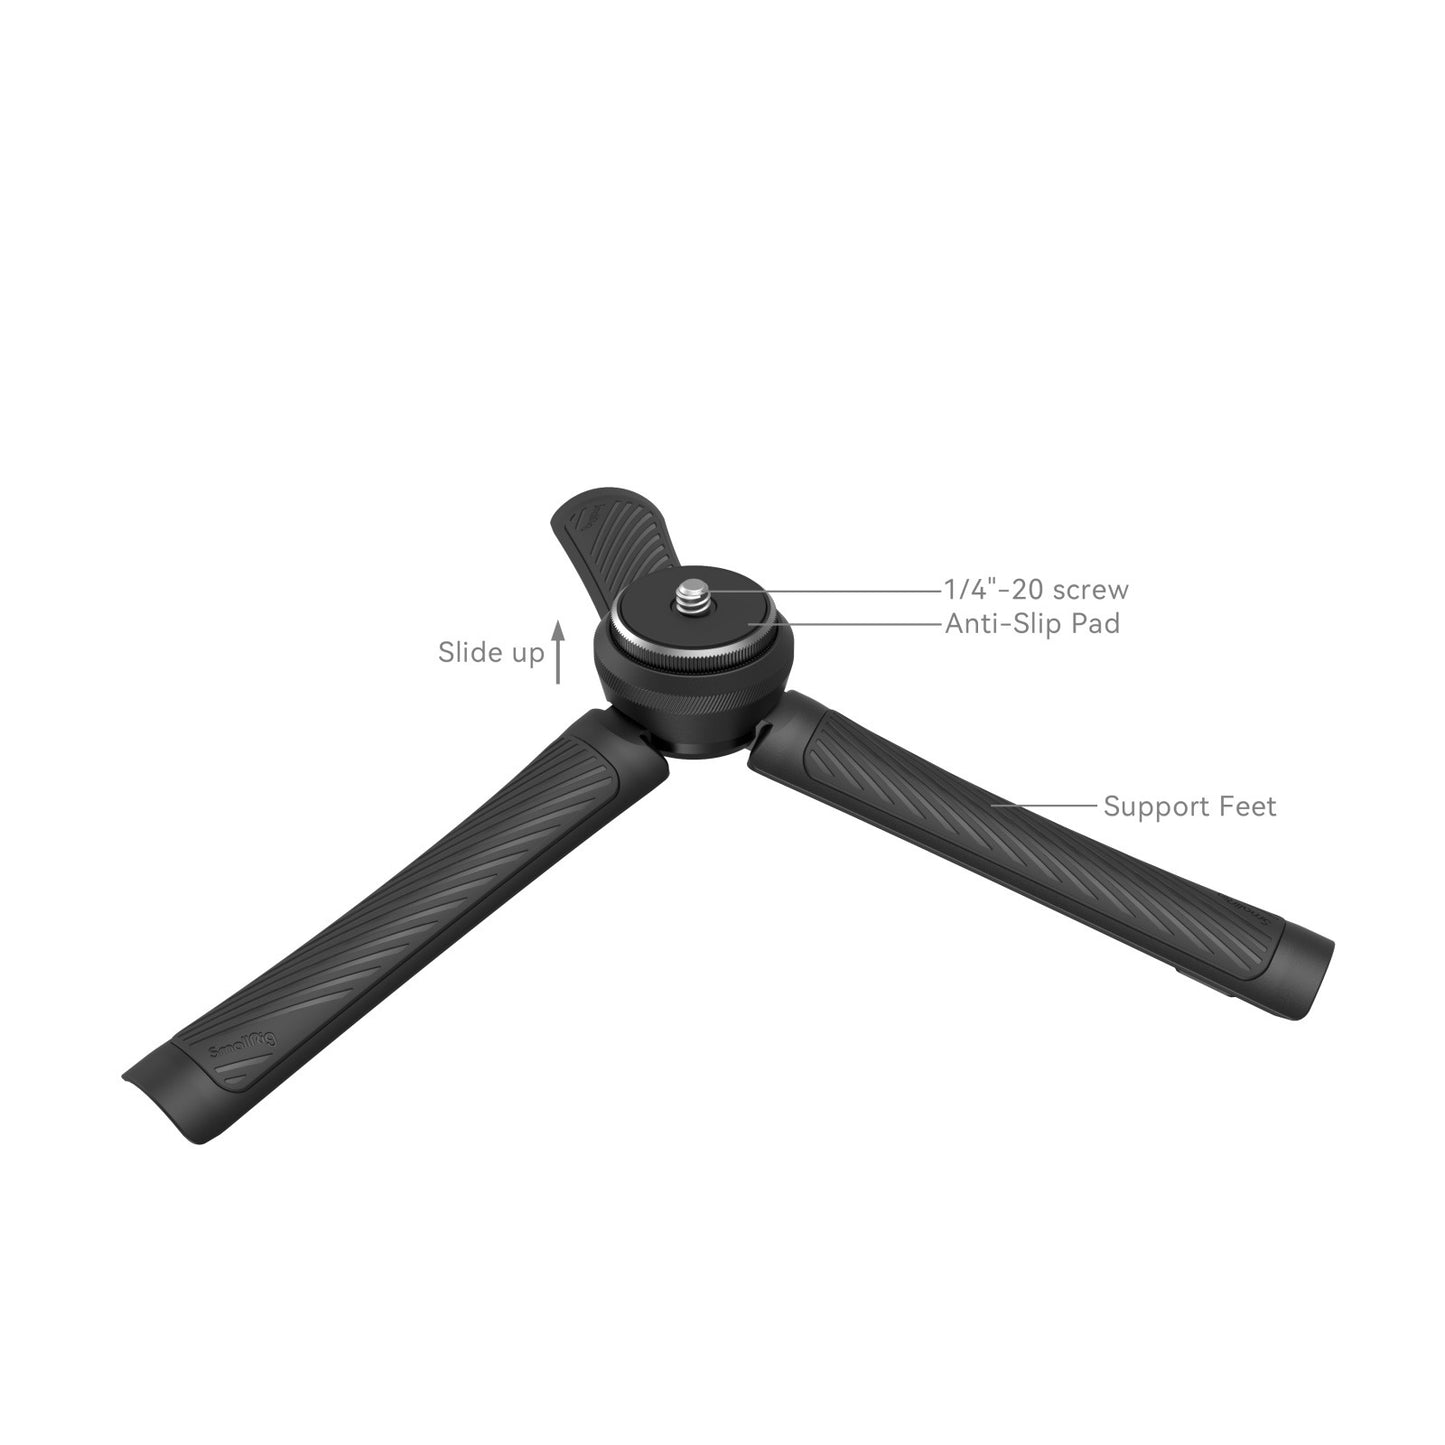 SmallRig Mini Quick Release Tripod with 1/4"-20 Screw for Gimbal Stabilizers, Cameras, Webcams, Mobile Phone Rigs, Camera Cage, Fill LIghts, and Other Accessories